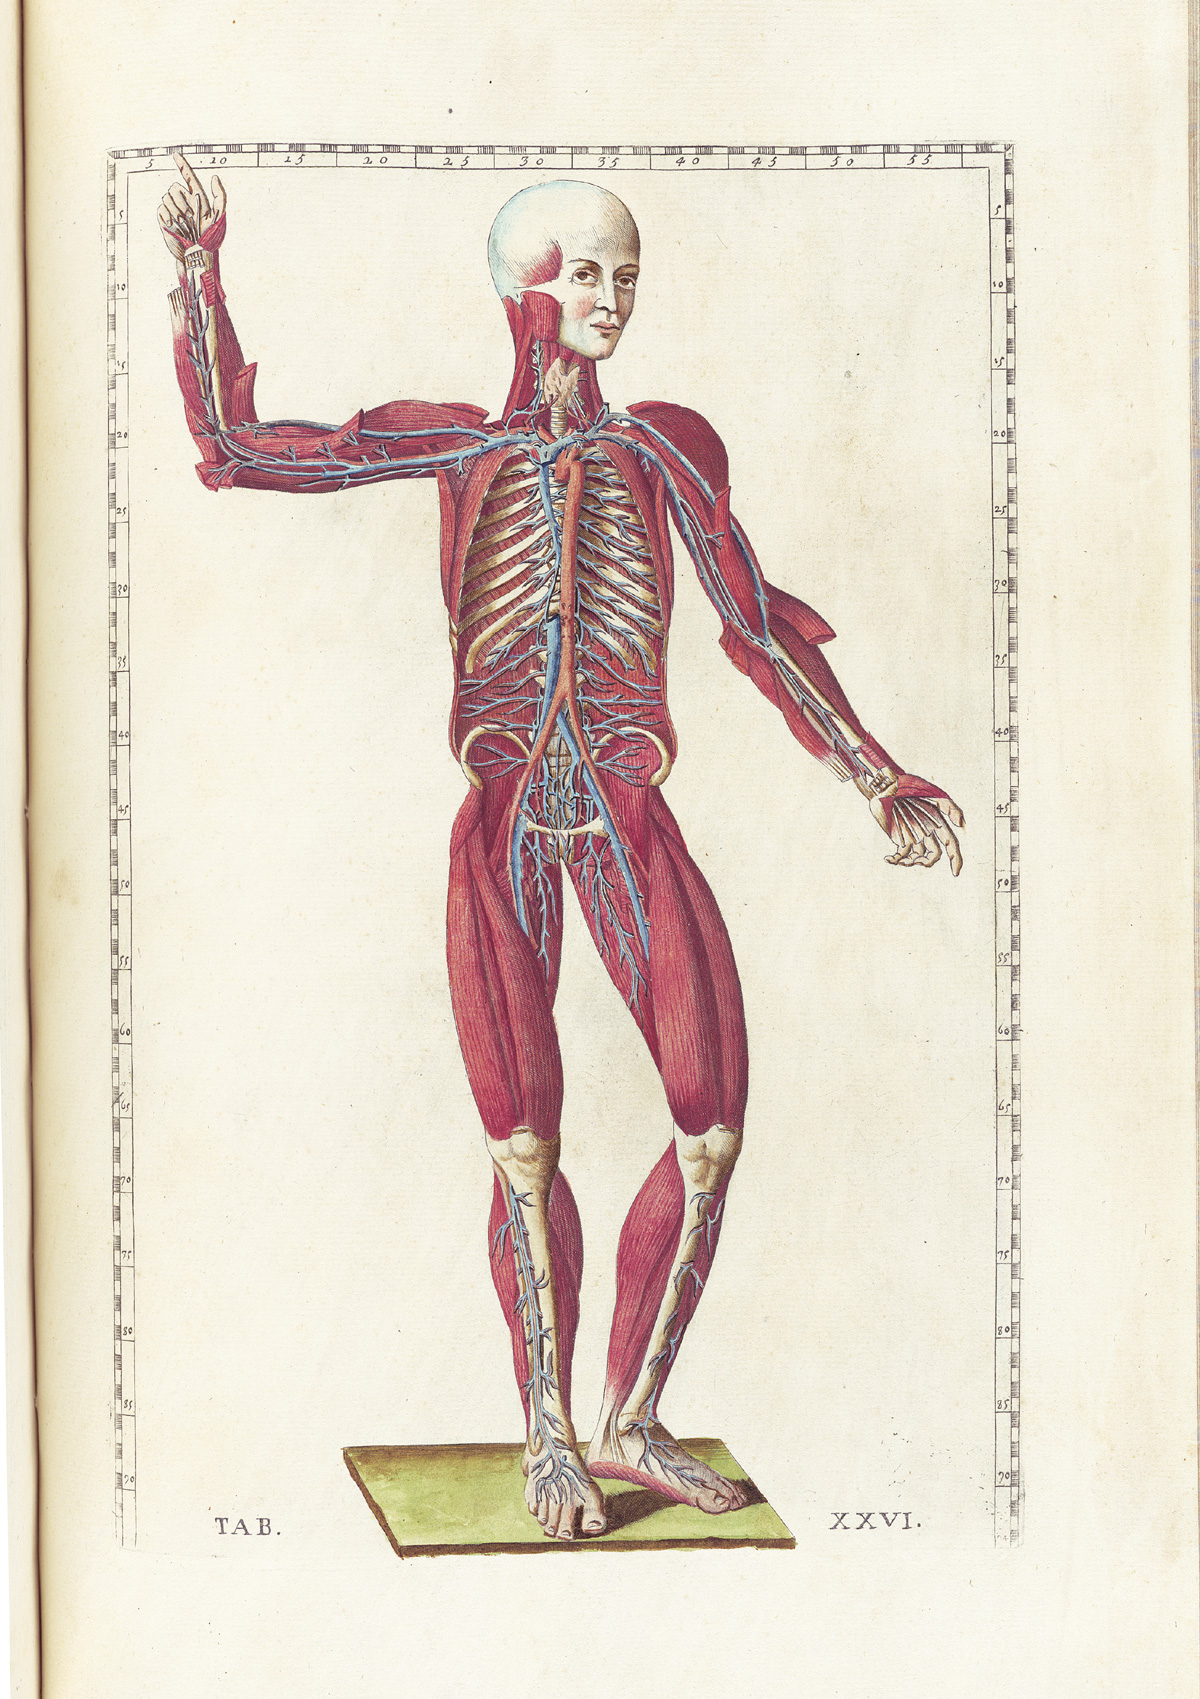 Hand-colored etching of a facing standing figure with flesh removed to expose the muscles and circulatory system excluding the heart; the figure is looking at the viewer with his right arm raised and bent at the elbow; from Bartholomeo Eustachi’s Tabulae anatomicae, NLM Call no.: WZ 260 E87t 1783.